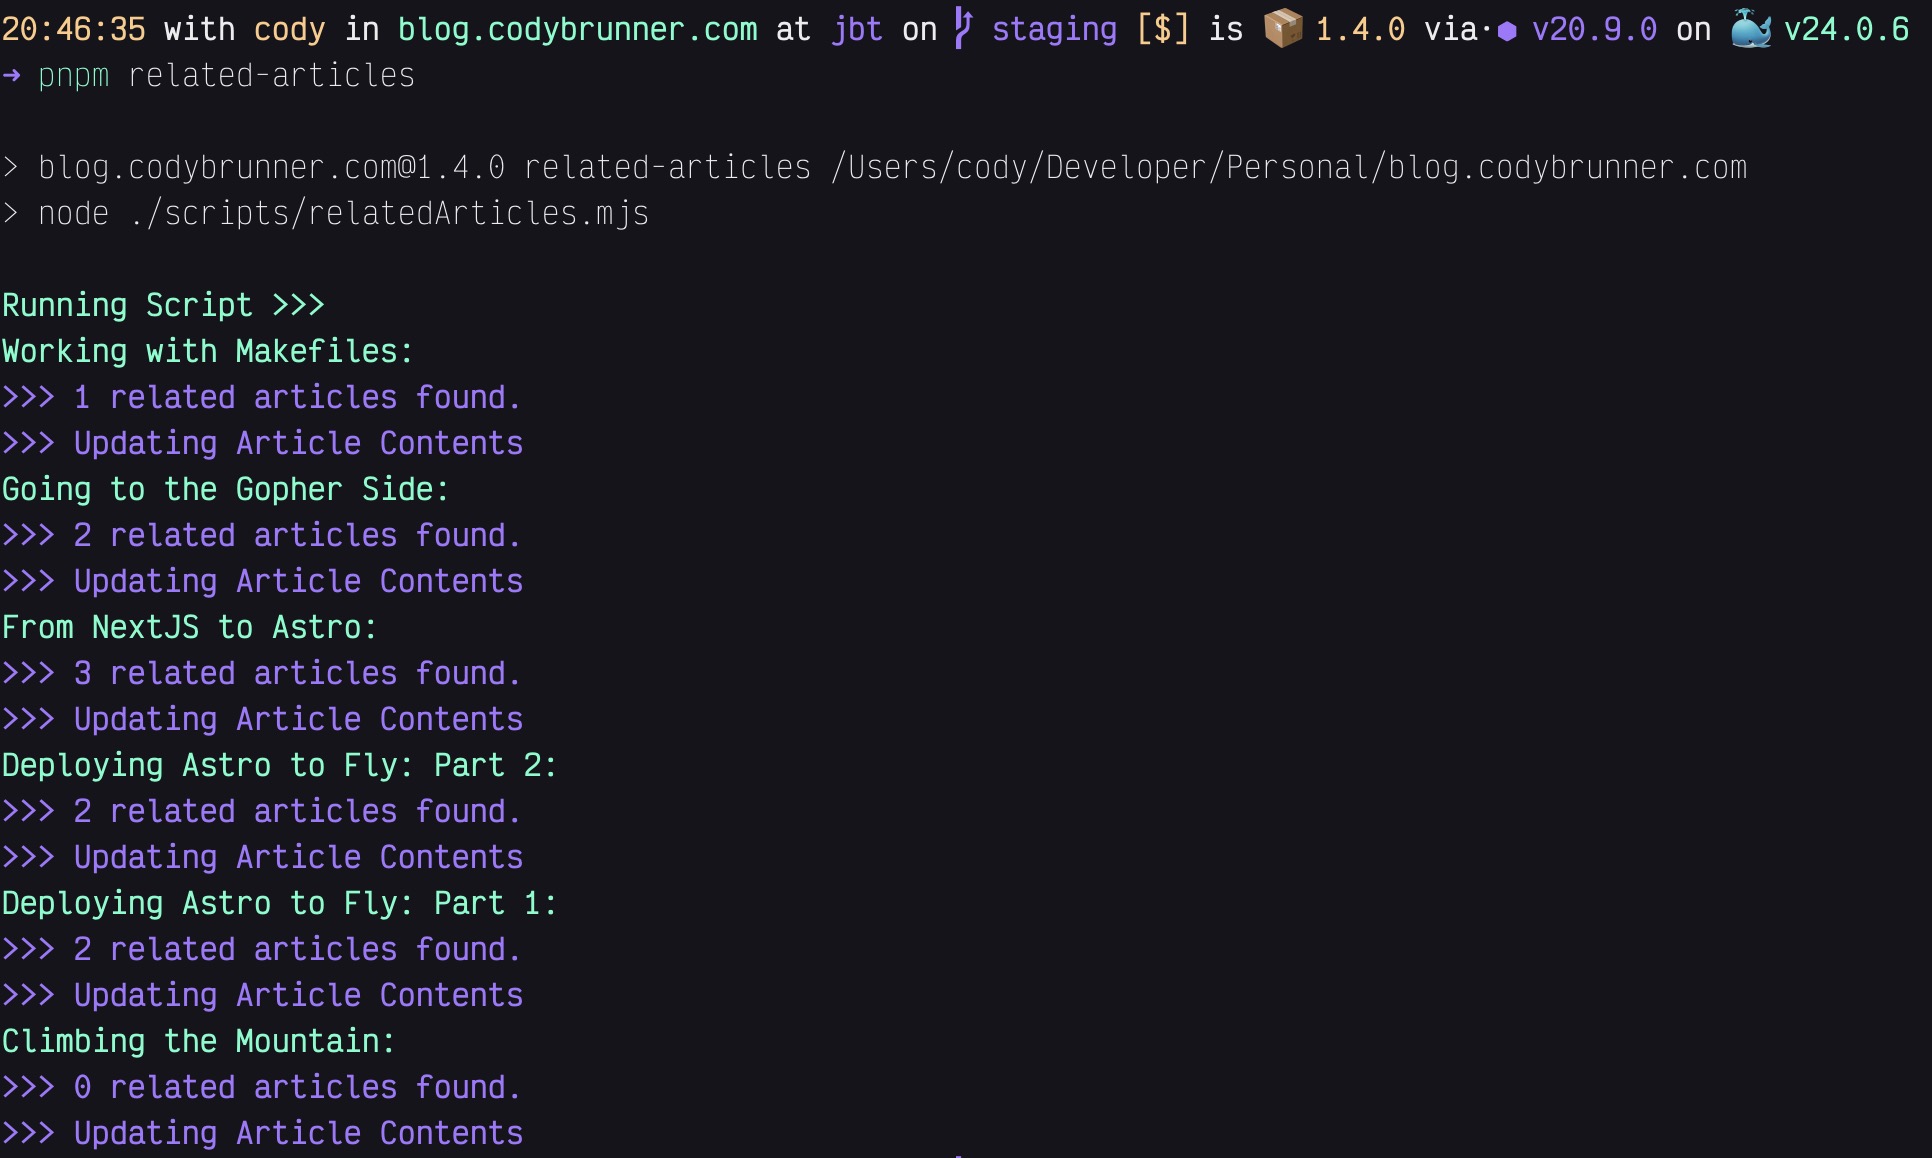 The gorgeous output in the terminal from running the relatedArticles script.